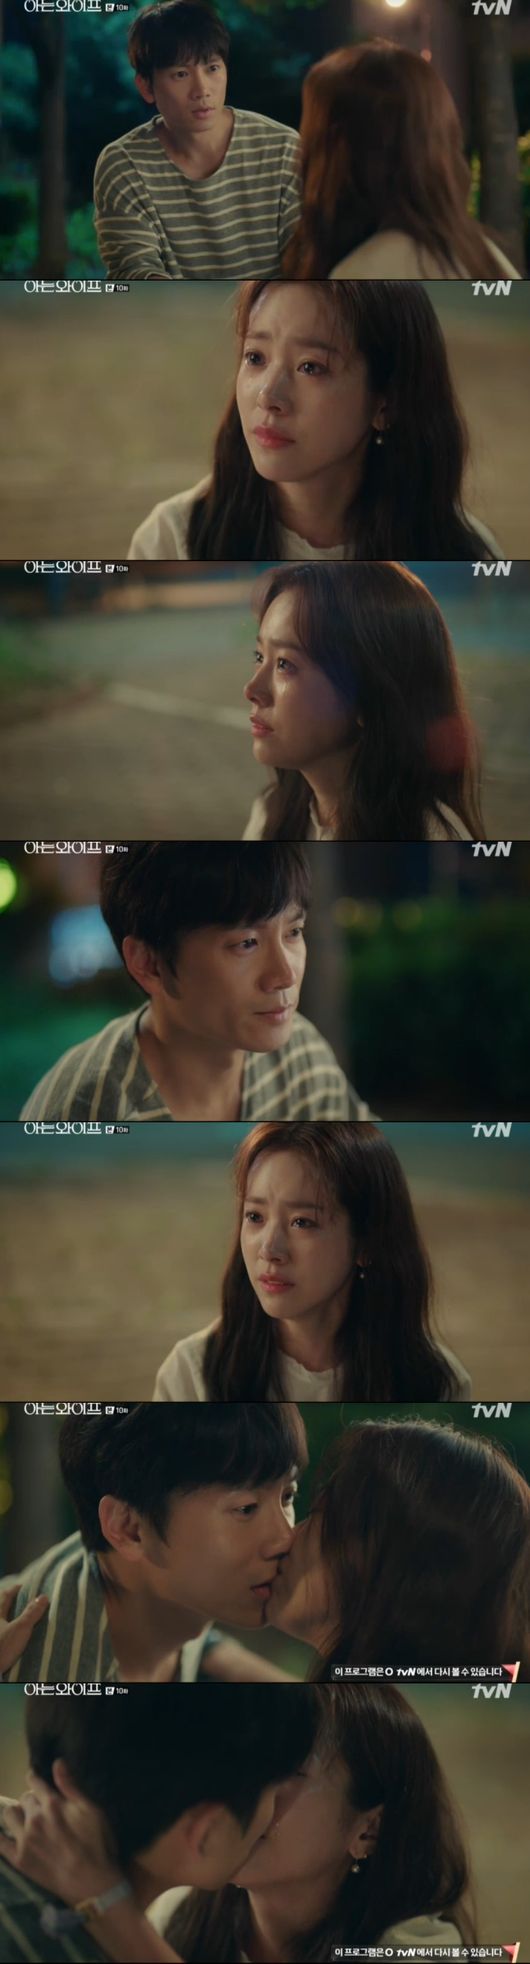 In Knowing Wife, Han Ji-min and Ji Sung fell in love again even in the fate of the change. Can everything be returned to its original state?In the TVN drama Ai Wife (directed by Lee Sang-yeop, and the play by Yang Hee-seung), which was broadcast on the 30th, Woojin (Han Ji-min) conveyed his heart toward Ji Sung.On this day, Woojin kept thinking about the moment when he and Juhyuk came into contact. So was Juhyeok.The next day, Woojin greeted him in search of the room where the family of Joo Hyuk was in the hospital, and the more he looked at Woojin, the more he liked it, and Joo Hyuk smiled bitterly.Ju-hyuk overheard the call of Ju-eun, and it was difficult to nurse the sick child until the day.Hye-won was disappointed when she never made the appointment, and then there was a big argument with Joo-hyuk, who returned home, and Hye-won, who returned home the next day, turned all the wedding photos with Joo-hyuk.It seemed as if he expressed the closed mind of Hyewon.Hye-won sent the request for a divorce and the burdens of the ju-hyuk to Delivery. He called Hye-won, saying, Do you have to do this?Hyewon said, I do not do this because I want to do this. I do not want to do what I want, I can not live as you want, I need someone who is more than anyone else.Joo Hyuk said it was all his fault.The news of Juhyeoks divorce was also told to the end and Woojin. Juhyuk was confused, saying, I do not know.I am in favor of Divorce, he said, and the two of them are not so good. After the end, he advised, Do what Juhyuk wants.Woojin kept his words, and looked at Juhyuk.Ju-hyuk was taken to the house of the end of the day. Ju-hyuk recalled Hye-wons words saying, You have changed, you are not the same as you were all I said.But Hyewon did not receive it. Ju-hyuk looked at the end of his happy relationship with Woojin.After the end, he wrote to Woojin whether he entered well, and Woojin also replied, asking for his best regards, but soon he deleted the letter again.Woojin went to Juhyeok and asked if Hyewons problem was due to him. Juhyuk said, I do not care, its my fault.Hye-won urged Ju-hyuk not to take time. Ju-hyuk asked him to think about it once more. Hye-won dragged out the divorce, saying, I do not want to consume emotions.Woojin finished dating Jonghu, and accidentally witnessed Hyewon and a young man (Hyunsu) together.Then, I heard that Joo Hyuk and Hyewon went to the courthouse, and I went to the house where Joo Hyuk was with the end of the day. Woojin was concerned about Joo Hyuk who tried to eat cup noodles alone.On behalf of such Woojin, the end prepared food, and there was an awkward feeling between Woojin and Joohyuk.My friends comforted Juhyuks divorce, but Juhyuk blamed himself for saying, Its all my fault, Im not good.The company had a marathon competition: after Woojin, Joo Hyuk and Jonghu arrived. Woojin was worried about the heavy drinking of the previous day.After the end, he looked at Woojins condition, saying that he would carry Woojin, but Woojin continued to care about Joohyuk.When Woojin heard that he had fallen into a cardiac arrest among the Marathon participants, he worried that he might be Ju-hyeok.I thought the person in the ambulance was Juhyuk, but fortunately it was not Juhyuk. At this time, Juhyuk appeared in front of Woojin, and Juhyuk asked, What is it, do you know?Woojin wept with relief, and felt more confused in his mind.After Marathon, he had a dinner party. Woojin calmed him down with a drink. Joo-hyuk looked at Woojin.While Joo Hyuk was on the phone, he saw Woojin, who was drunk, blowing outside. They decided to break the drink at the playground.Woojin sat down at seesaw and was fortunate to say, My heart also fell down every time I was a child.Then, to Ju-hyuk, who was going back, Woojin stood up saying, Im a little calmed down. But still he was drunk, and Ju-hyeok helped Woojin.Joo-hyuk burned Woojin on a visible three-wheeled bicycle.At this point, Woojin fell; Joo Hyuk asked, Woojin! Are you okay? and then grabbed Woojins hand and tried to raise him.Woojin said, I do not mind, I do not know what I can not do. I know that I can not do it, but I know it is not my way from the beginning. I have been blind, I want to be blind, I want to be uncomfortable, I feel comfortable and dependent.I just do not know everything, conscience, guilt, I do not know, and just one thing is that I like the deputy a lot, he confessed with tears.Joo Hyuk refused to say, No, no, we can not, and Woojin pulled such a ju-hyuk and kissed him.On the other hand, in the trailer, a homeless man who changed the fate of Juhyeok said, There is still a chance, an opportunity to turn everything back. He also predicted an interesting development to turn the turning point of the drama by drawing a coin to him and returning to the past.Capture the broadcast screen of Knowing Wife